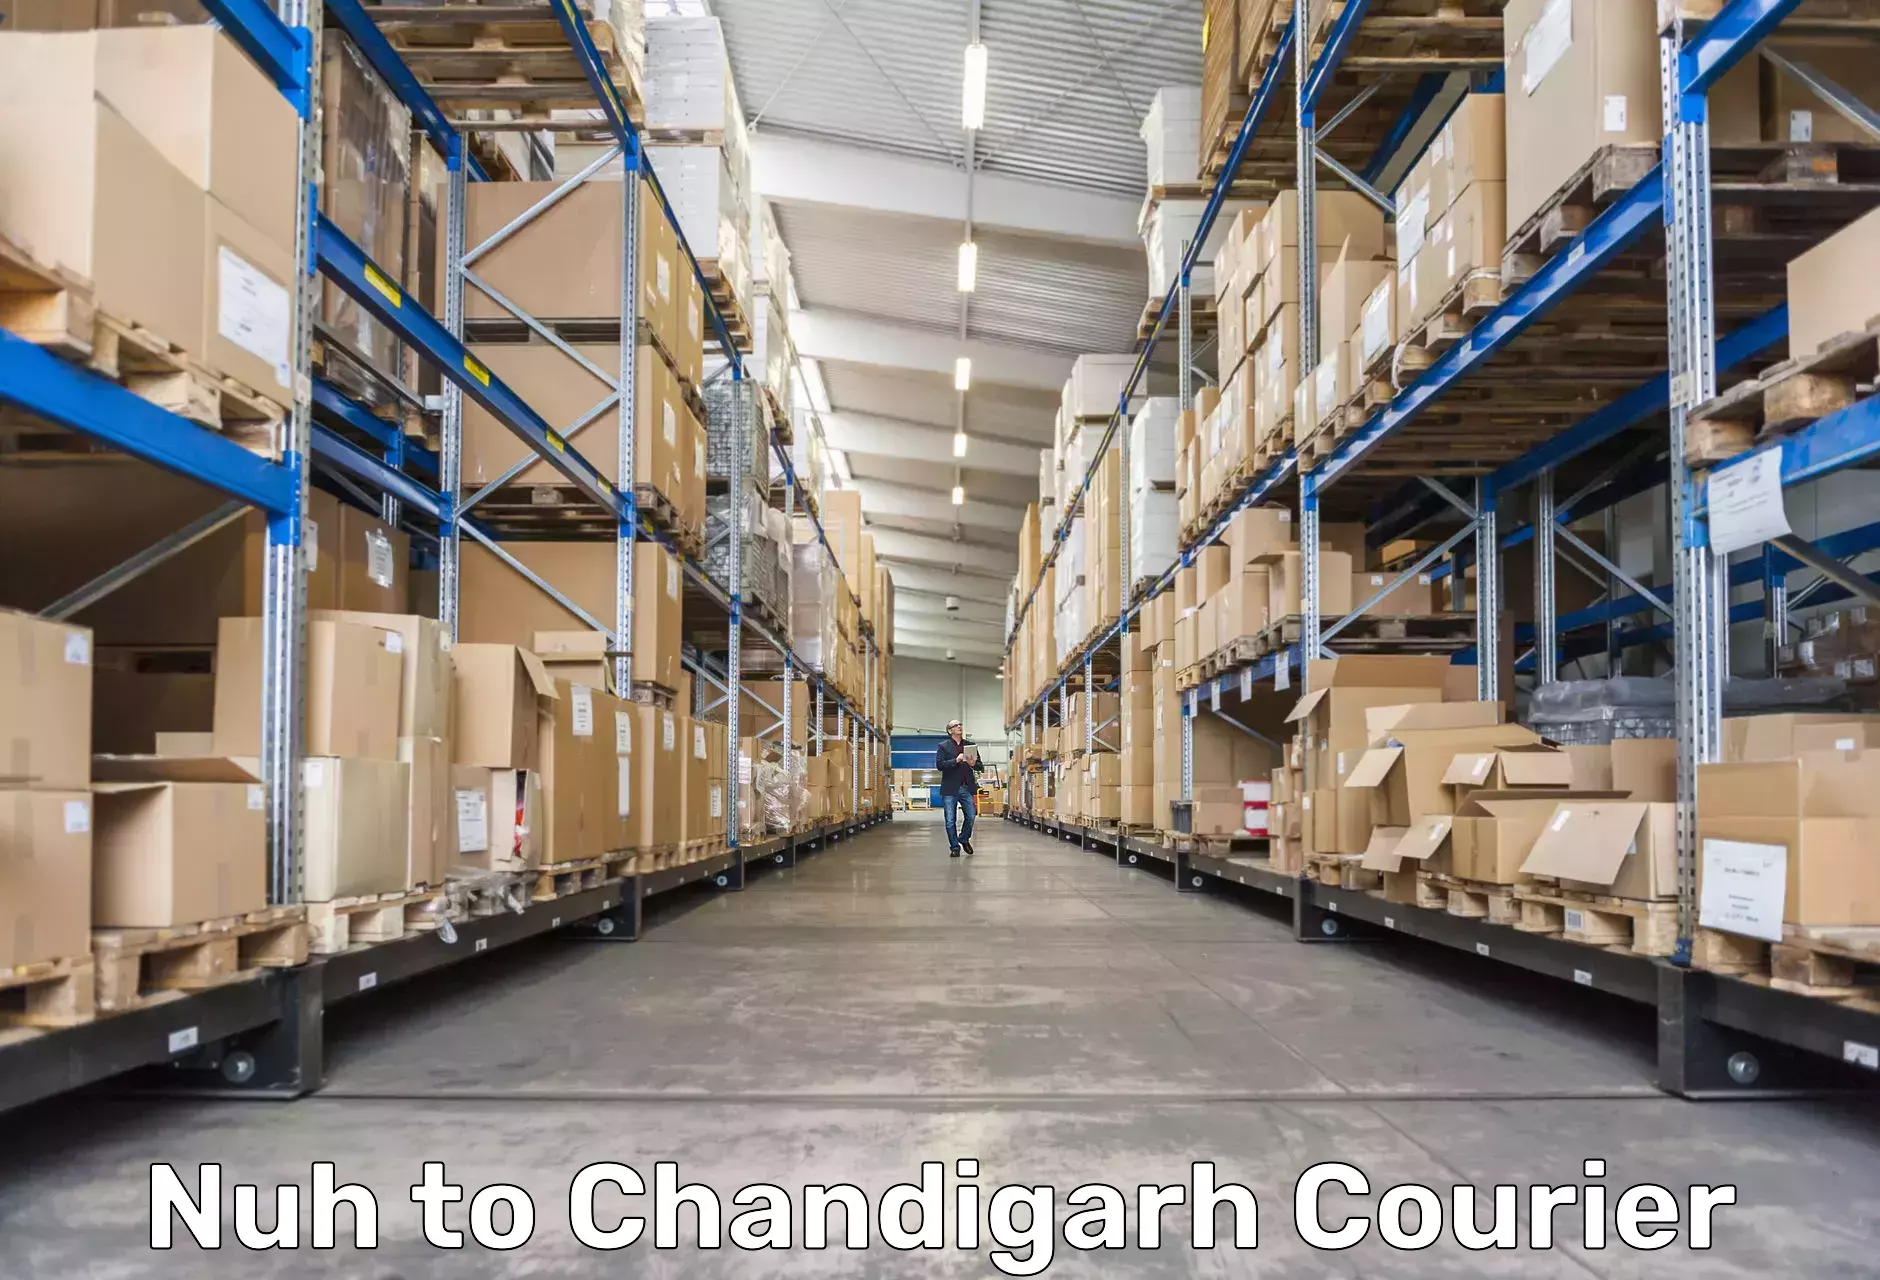 Cargo delivery service Nuh to Chandigarh